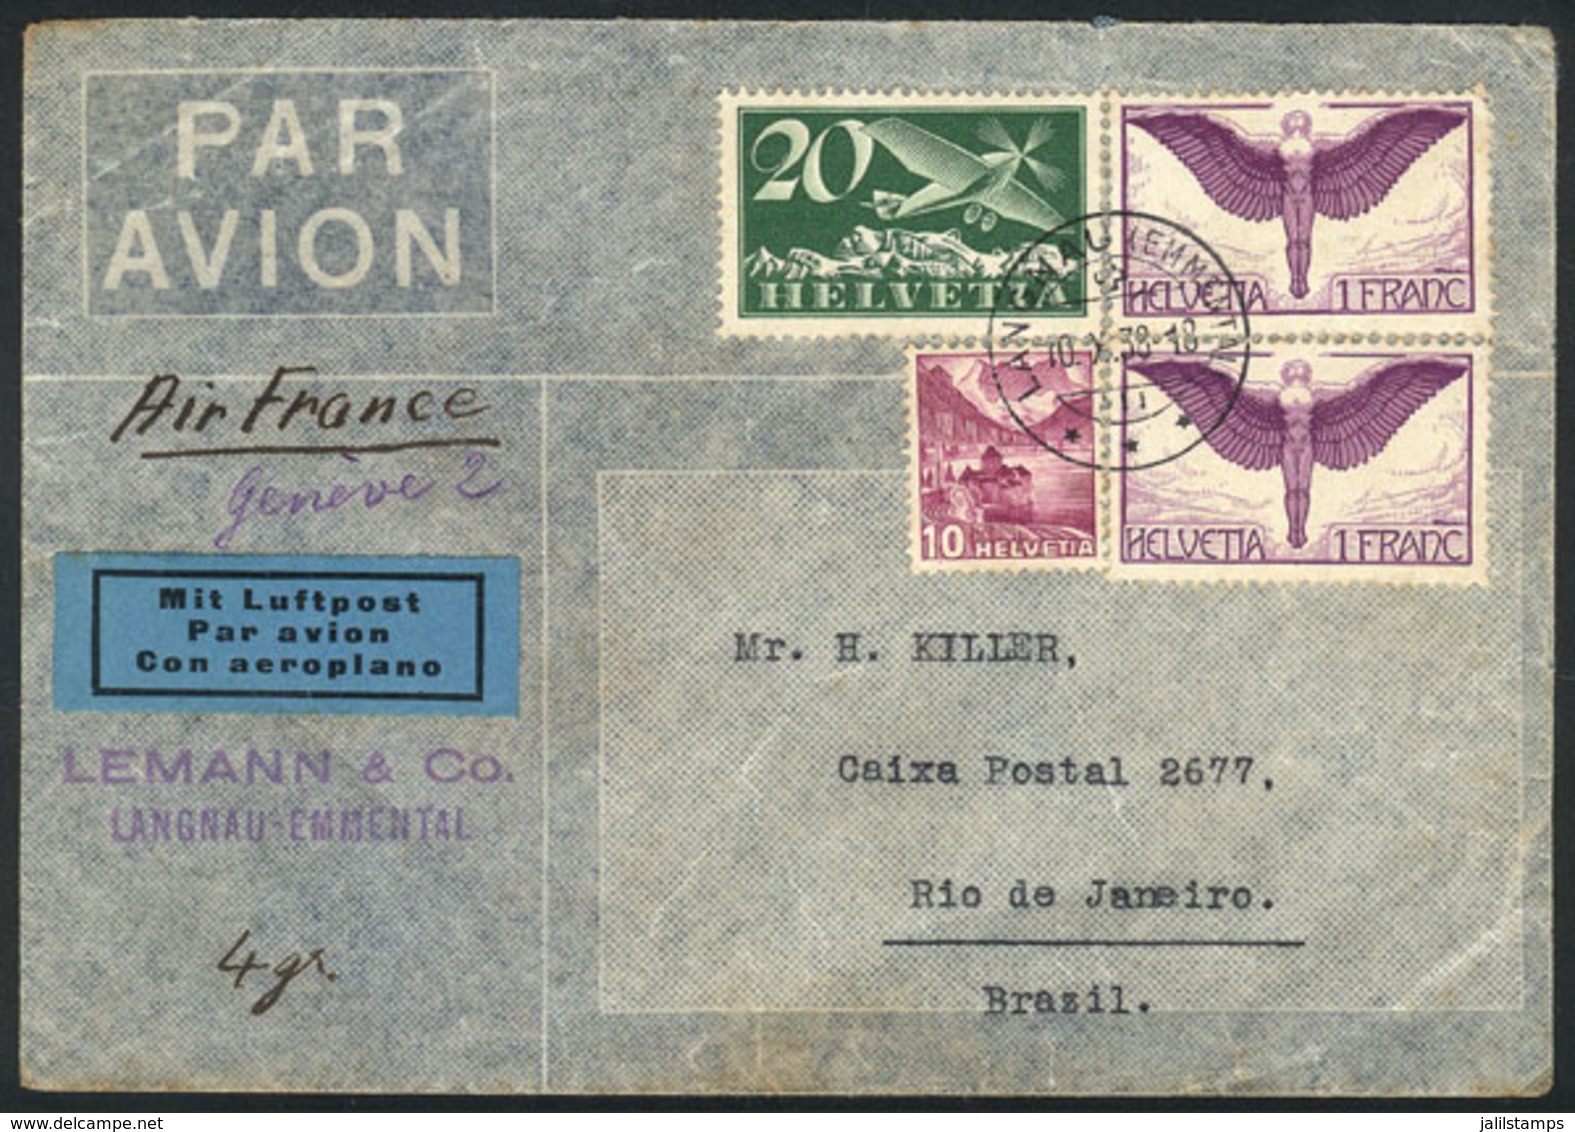 SWITZERLAND: Airmail Cover Sent From Langnau To Rio De Janeiro On 10/OC/1938 By Air France Franked With 2.30Fr., Very Ni - ...-1845 Prephilately